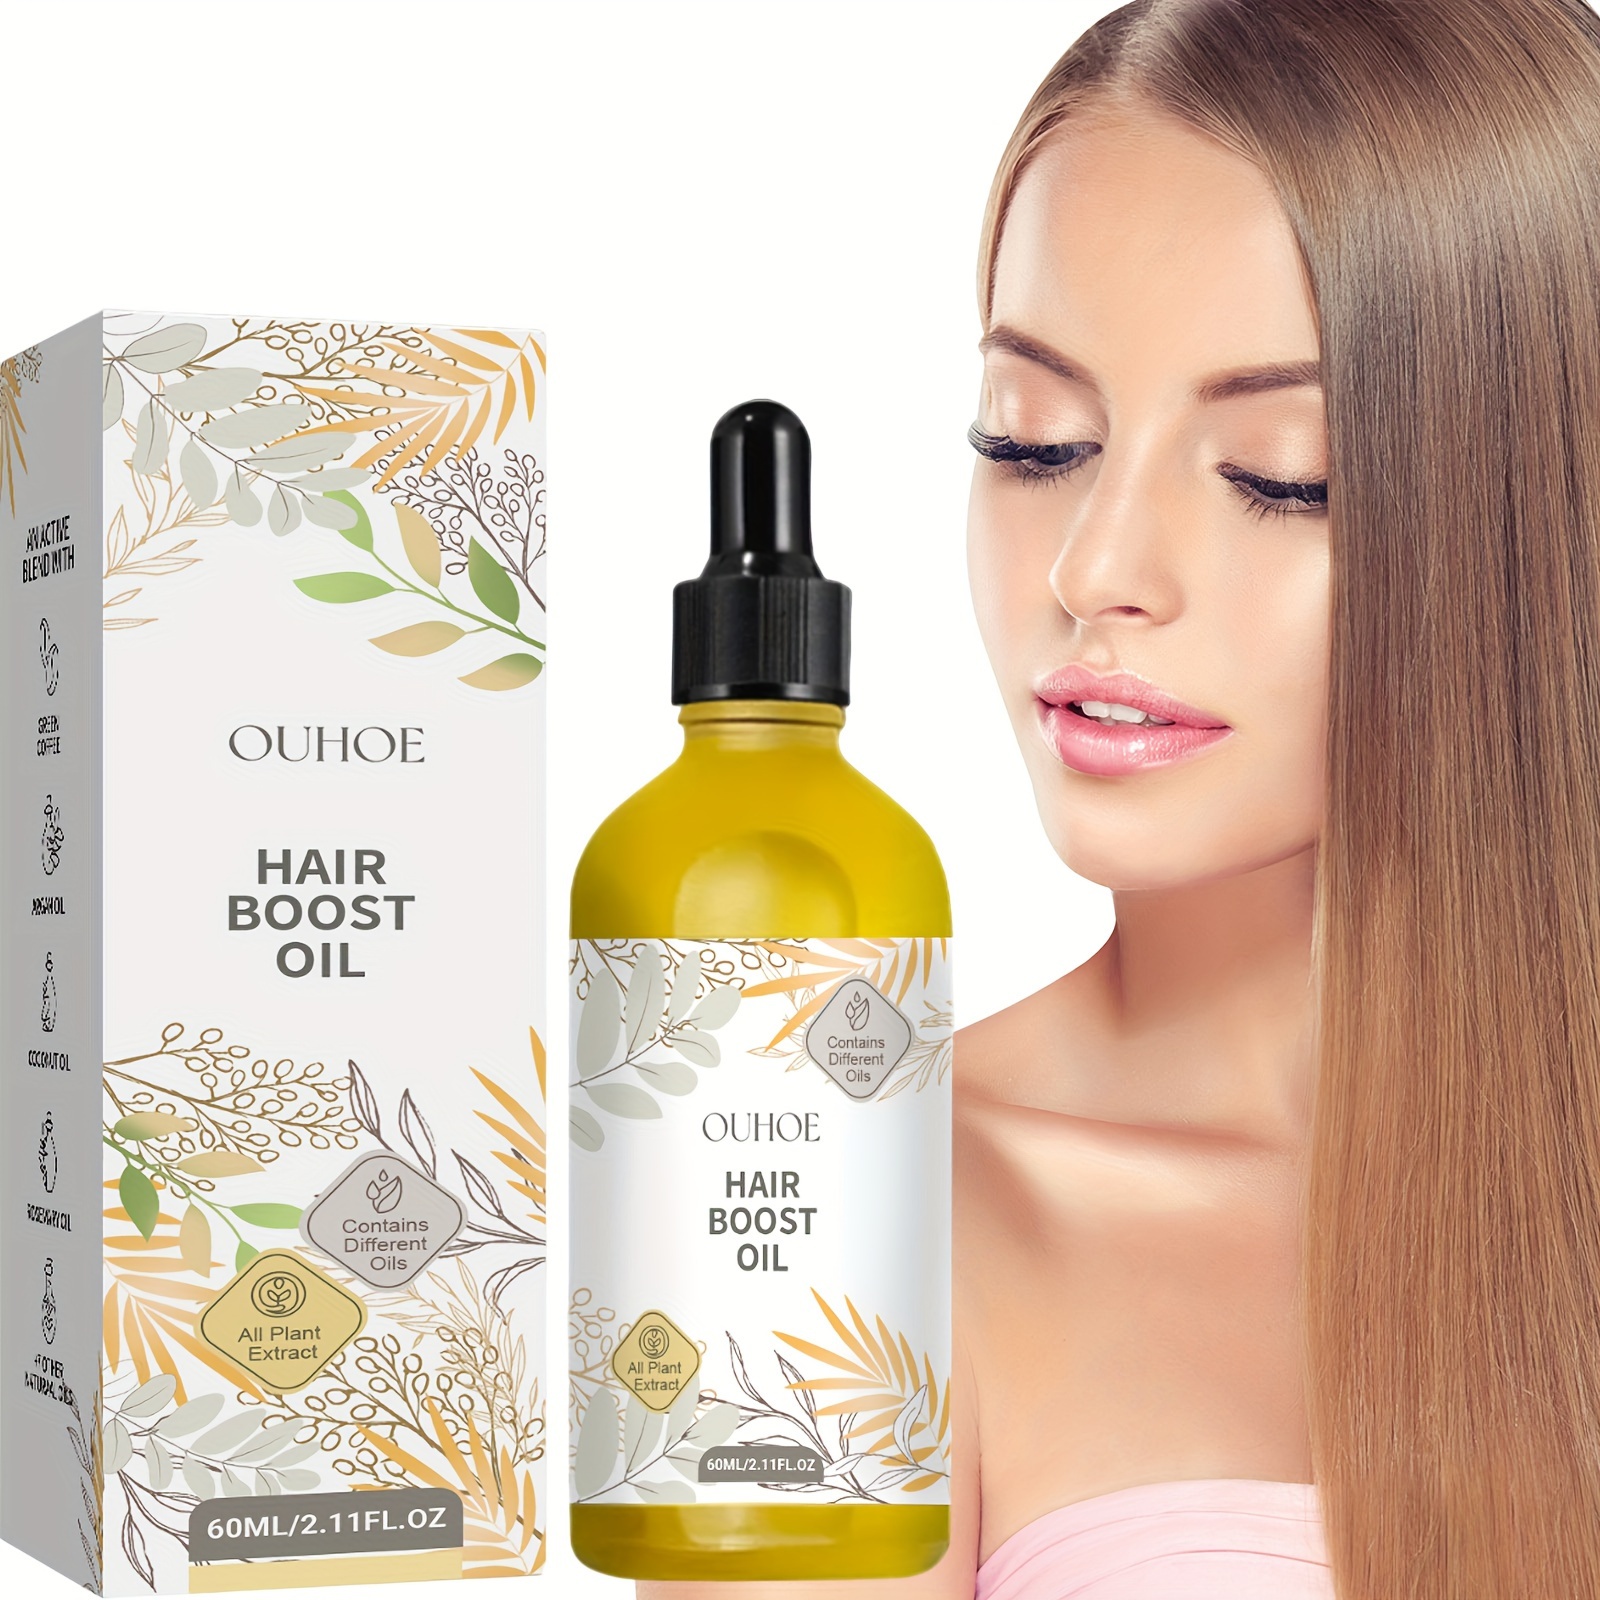 

Hair Boost Oil, 60ml/2.1fl.oz, Nourishing Treatment With Lavender, Castor, Rosemary, Coconut, And Coffee Extract, Softens And Adds Volume, Deep Conditioning For Lustrous Hair